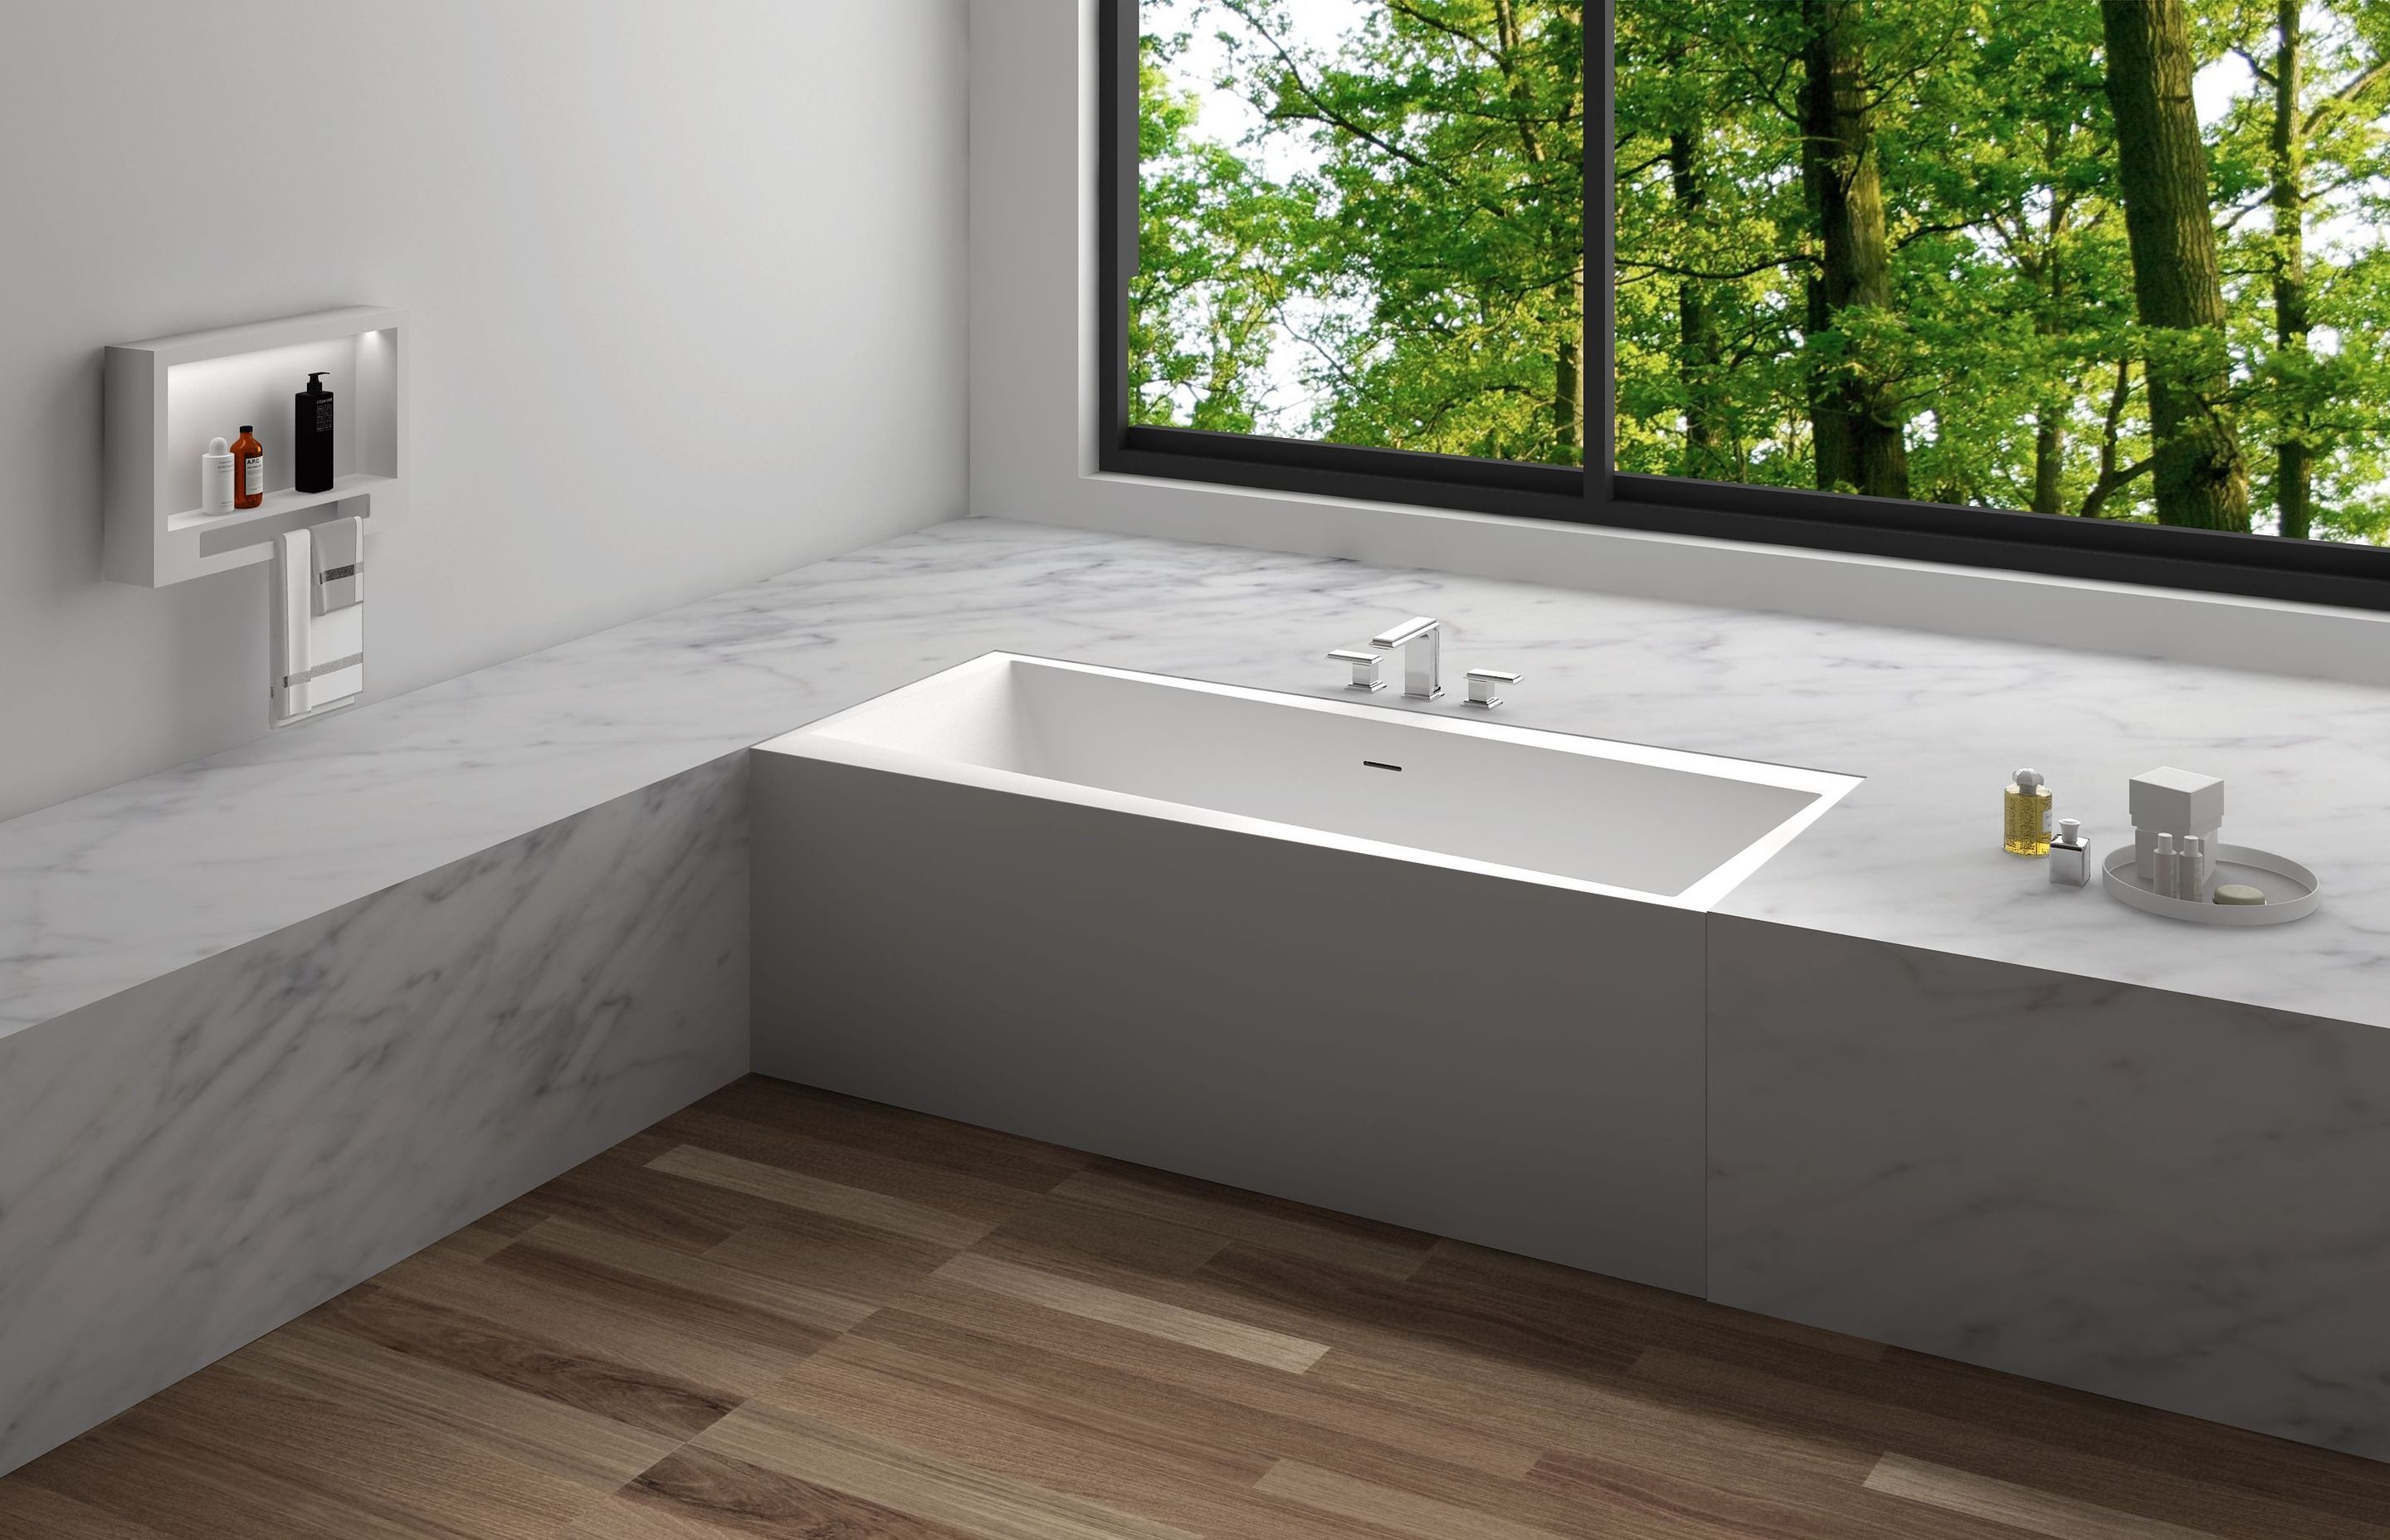 Stonebaths has a range of sophisticated baths suited to contemporary bathrooms.